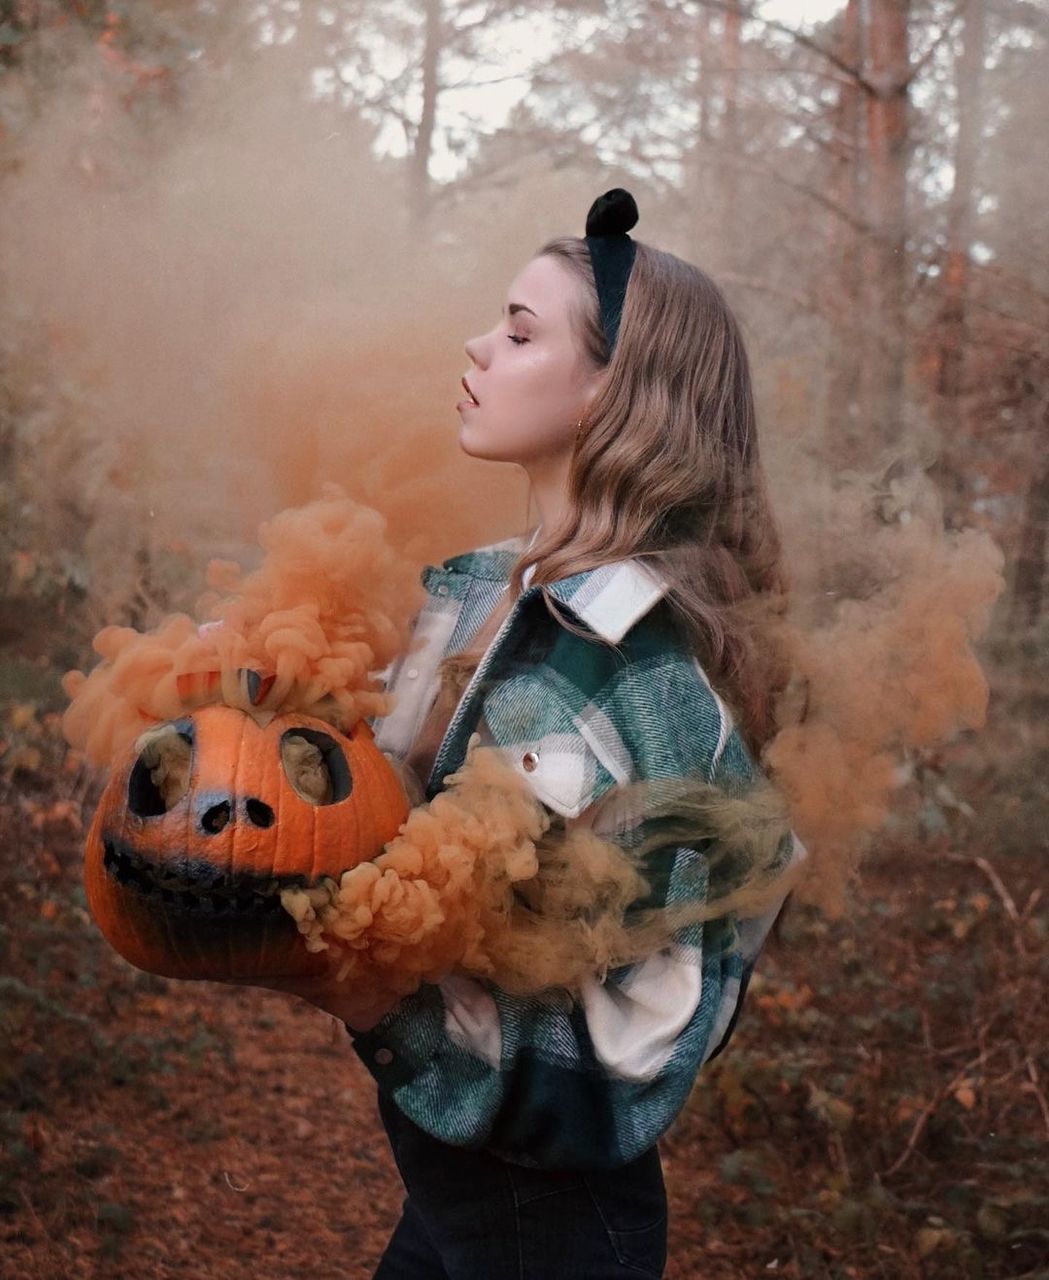 childhood, one person, child, autumn, halloween, women, holding, nature, celebration, female, standing, smiling, costume, waist up, forest, adult, tree, fantasy, emotion, clothing, spooky, toy, three quarter length, outdoors, cute, pumpkin, land, day, food, person, dressing up, plant, happiness, food and drink, holiday, innocence, lifestyles